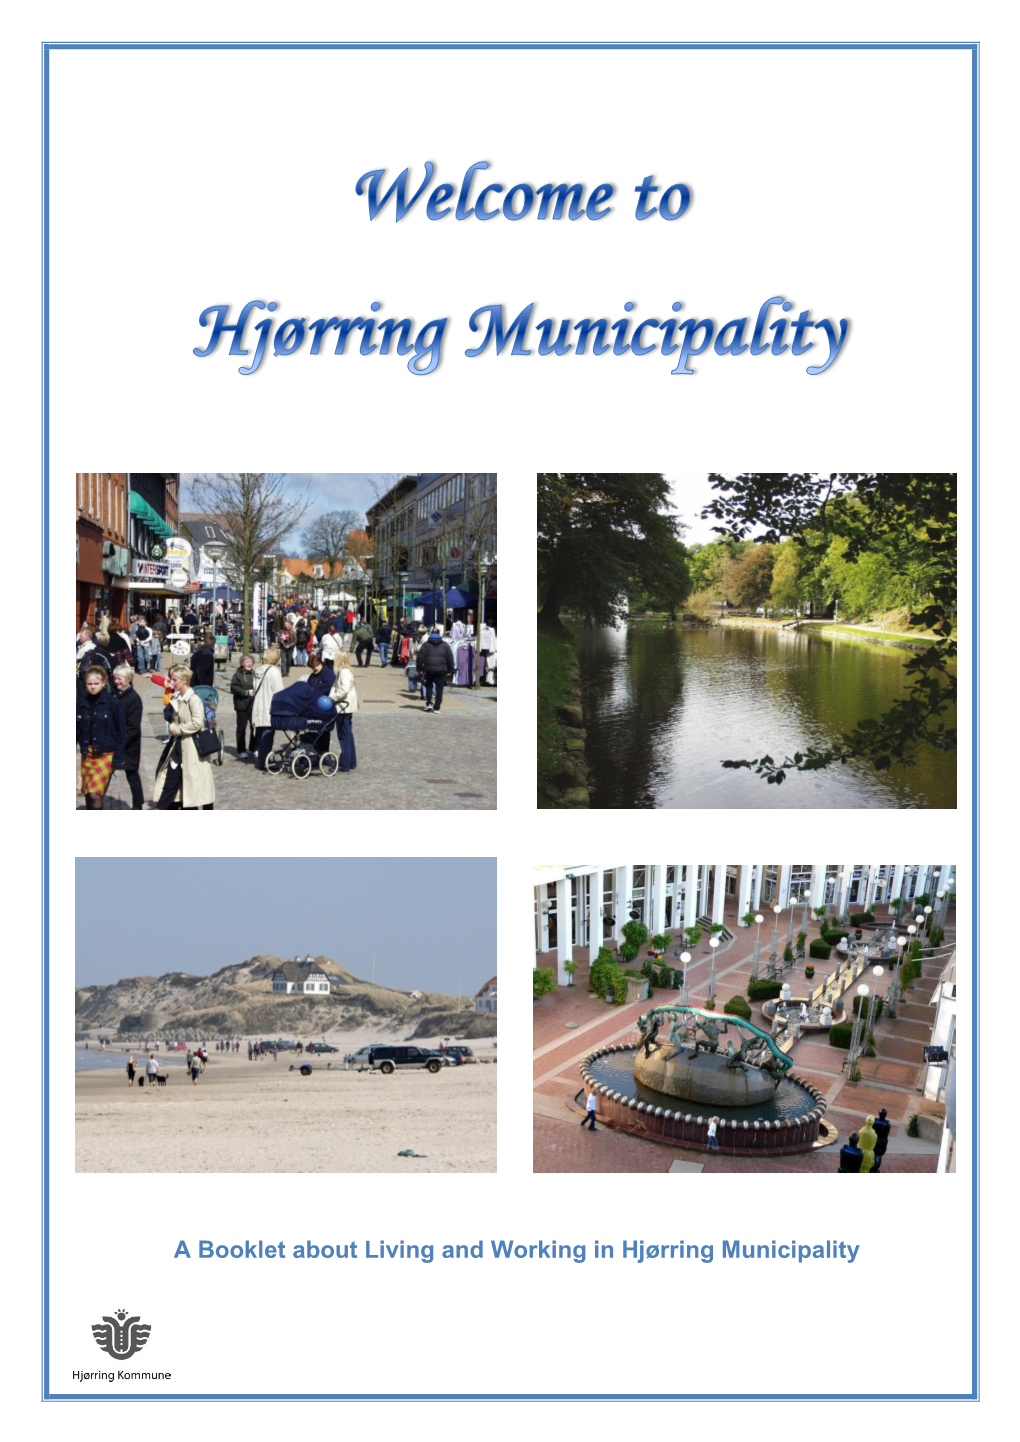 A Booklet About Living and Working in Hjørring Municipality